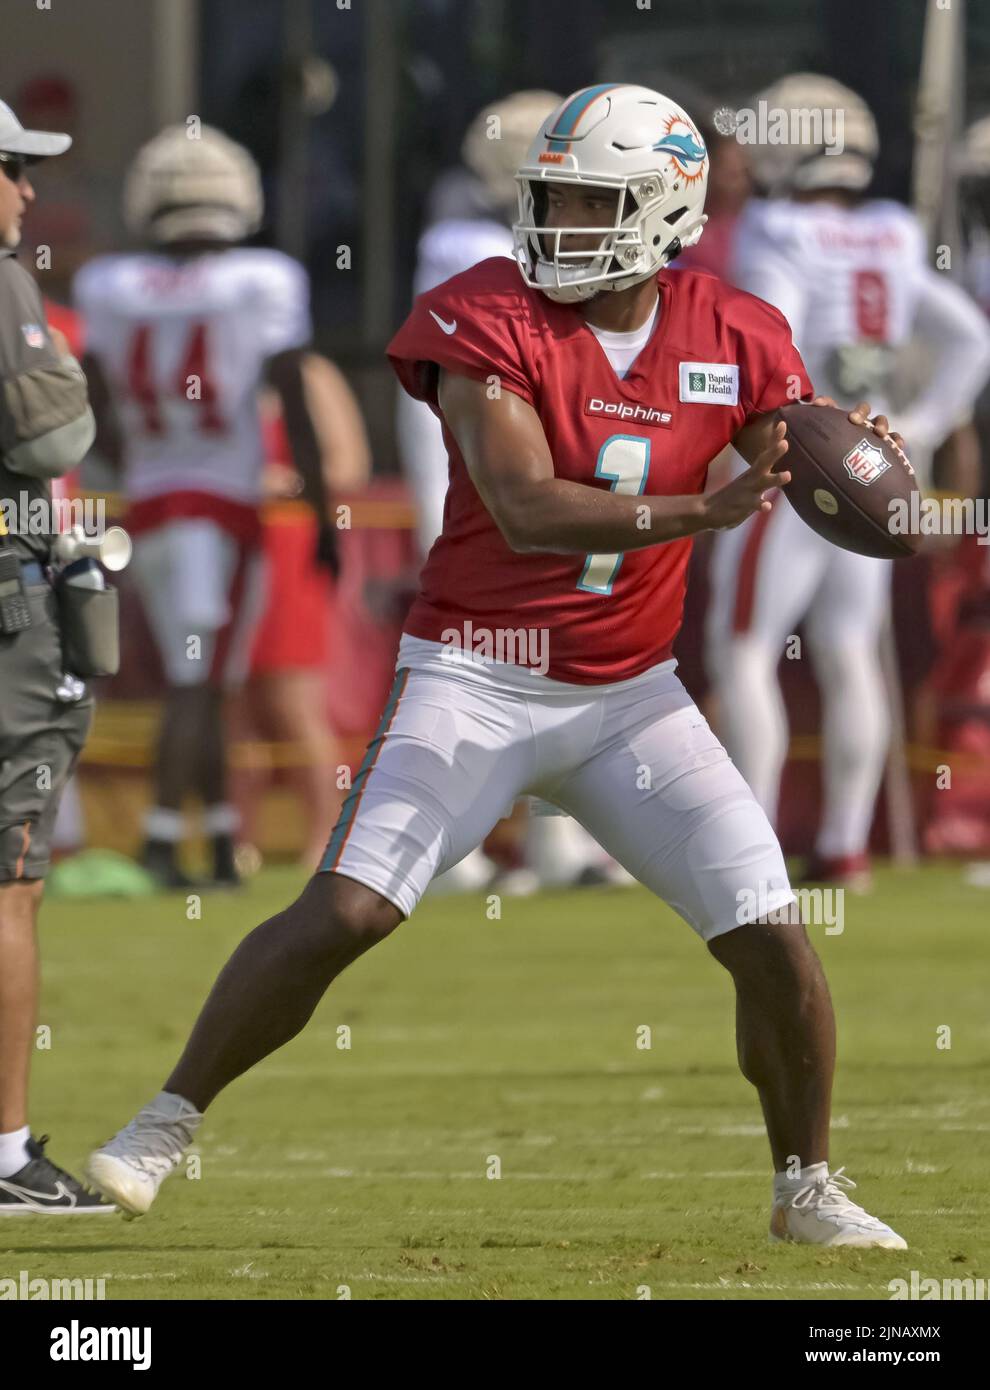 Tampa, United States. 10th Aug, 2022. Miami Dolphins quarterback Tua Tagovailoa passes during a joint practice with the Tampa Bay Buccaneers at the Buccaneer's training center in Tampa, Florida on Wednesday, August 10, 2022. Photo by Steve Nesius/UPI Credit: UPI/Alamy Live News Stock Photo